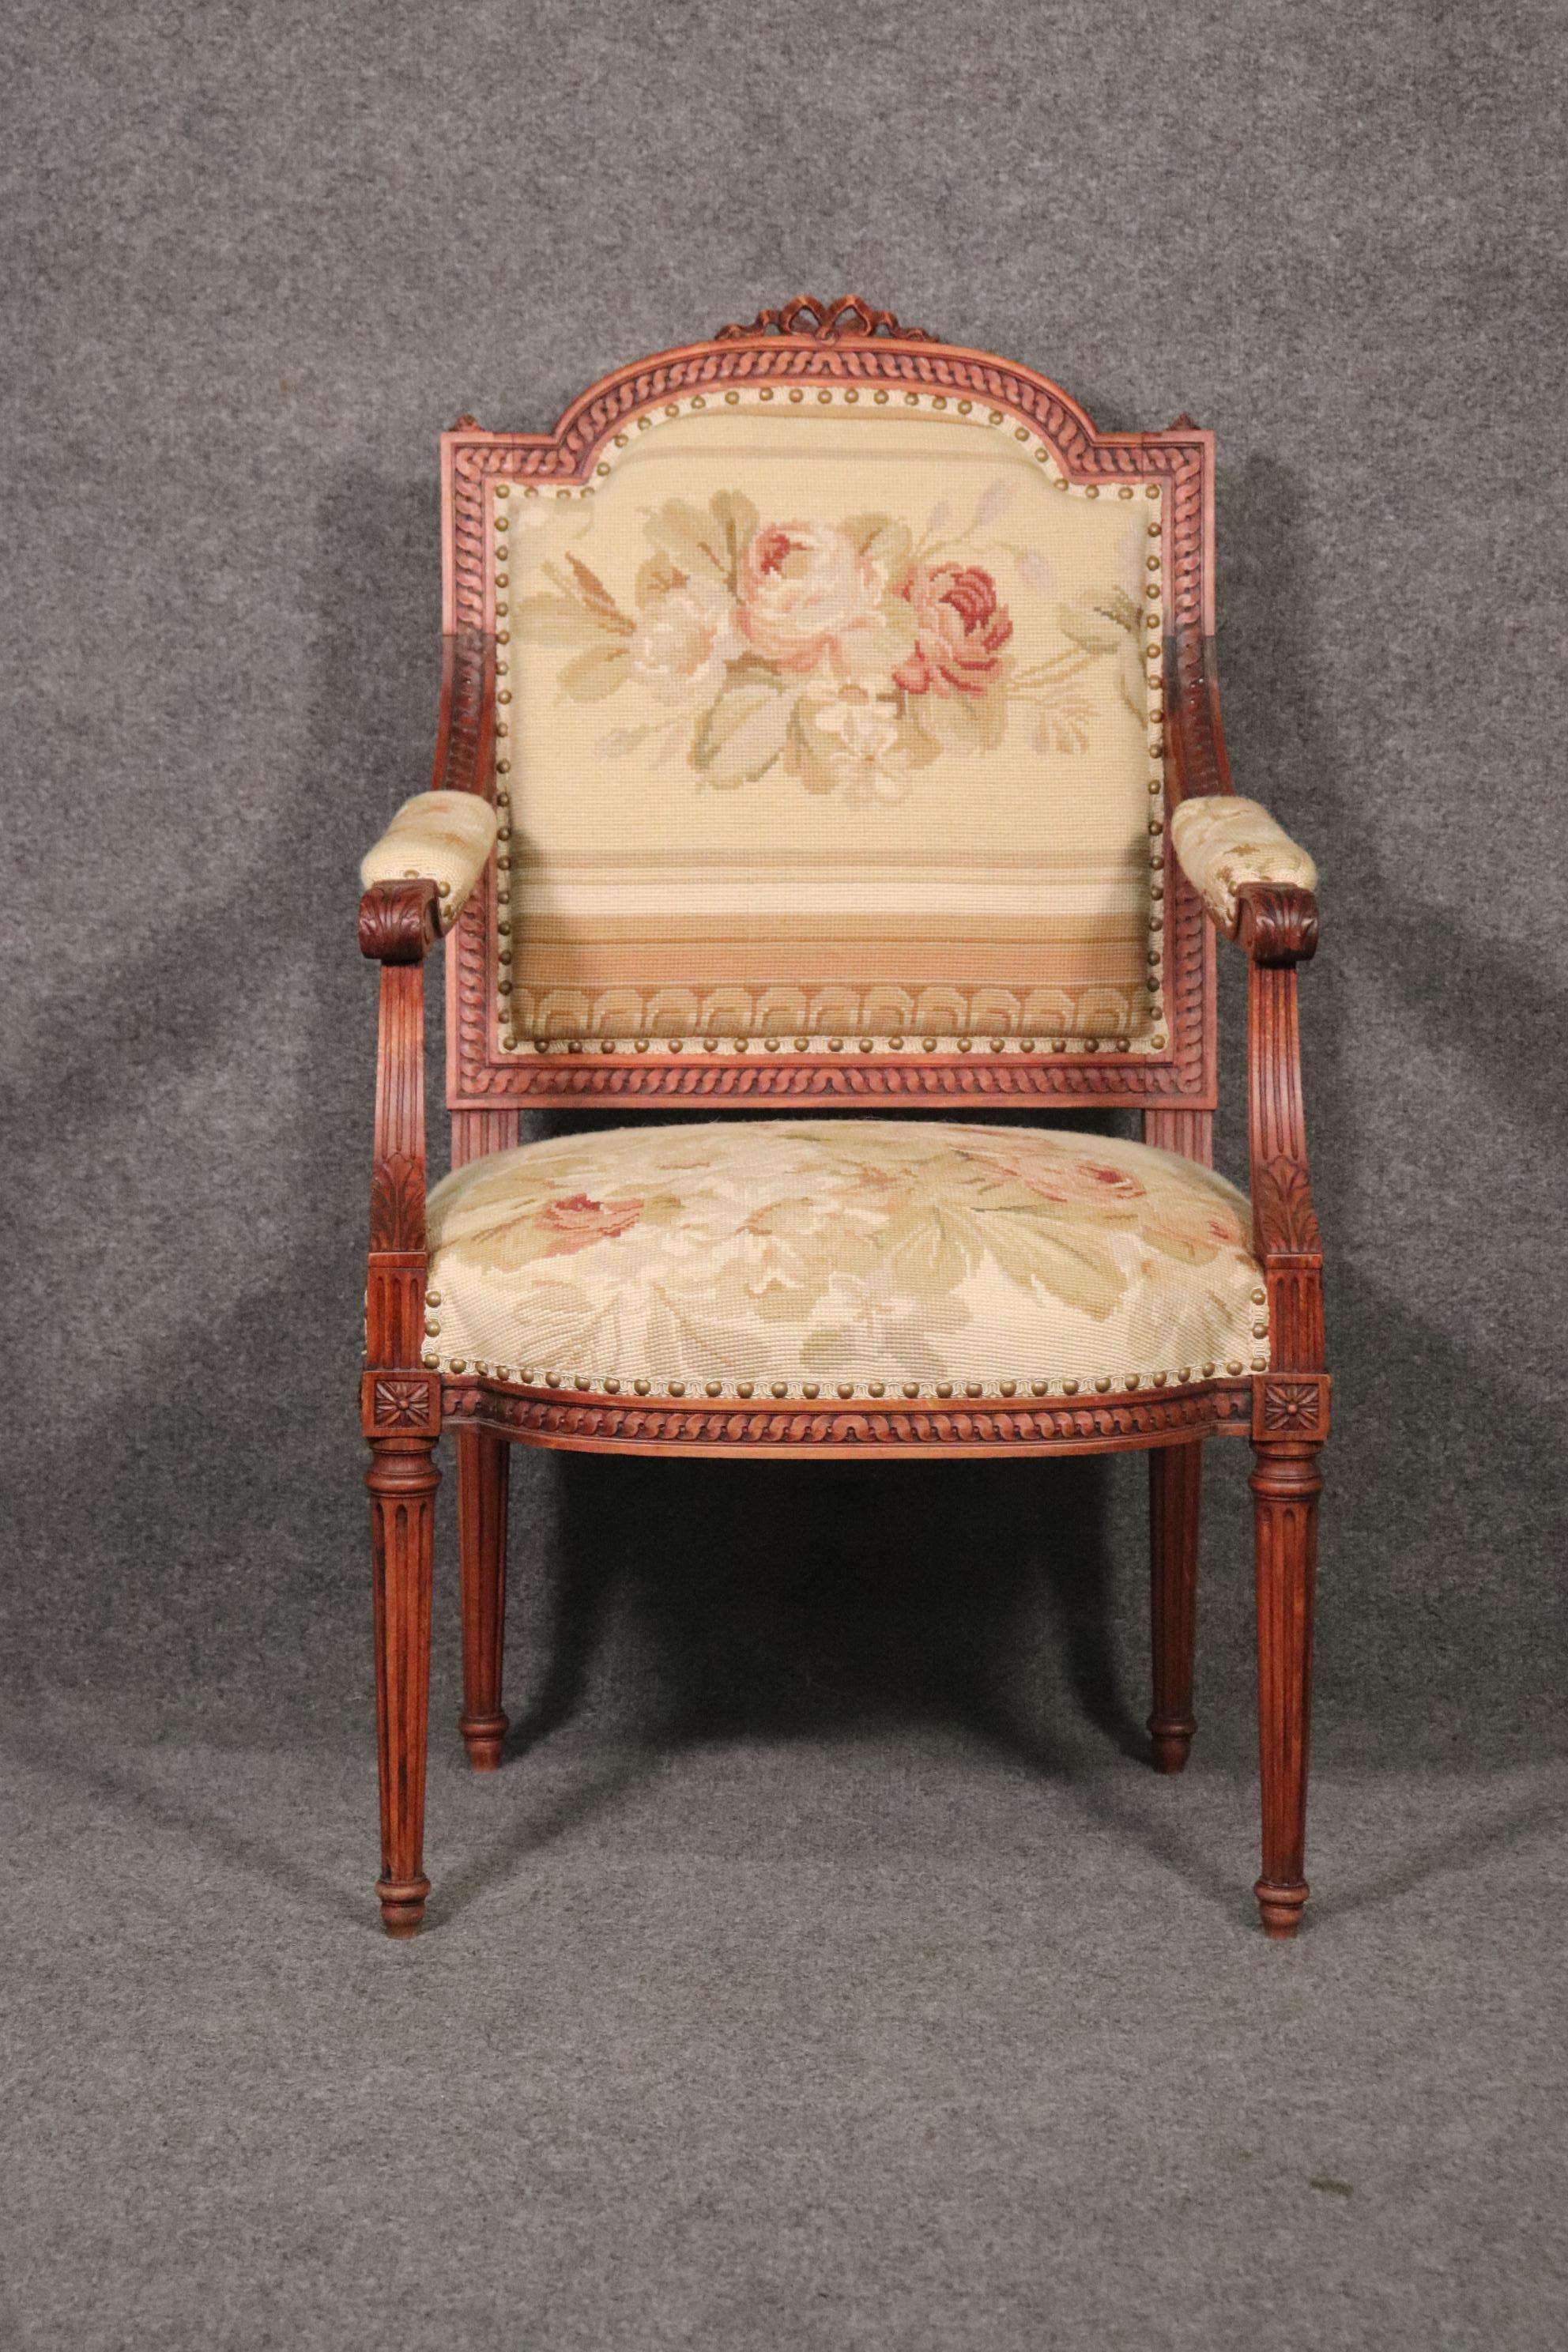 Dimensions- H: 40in W: 24in D: 24in SH: 19in
This Louis XVI Style French Armchair is made of the highest quality and is perfect for you and your home! If you look at the photos provided you will see the attention to detail within the elaborate